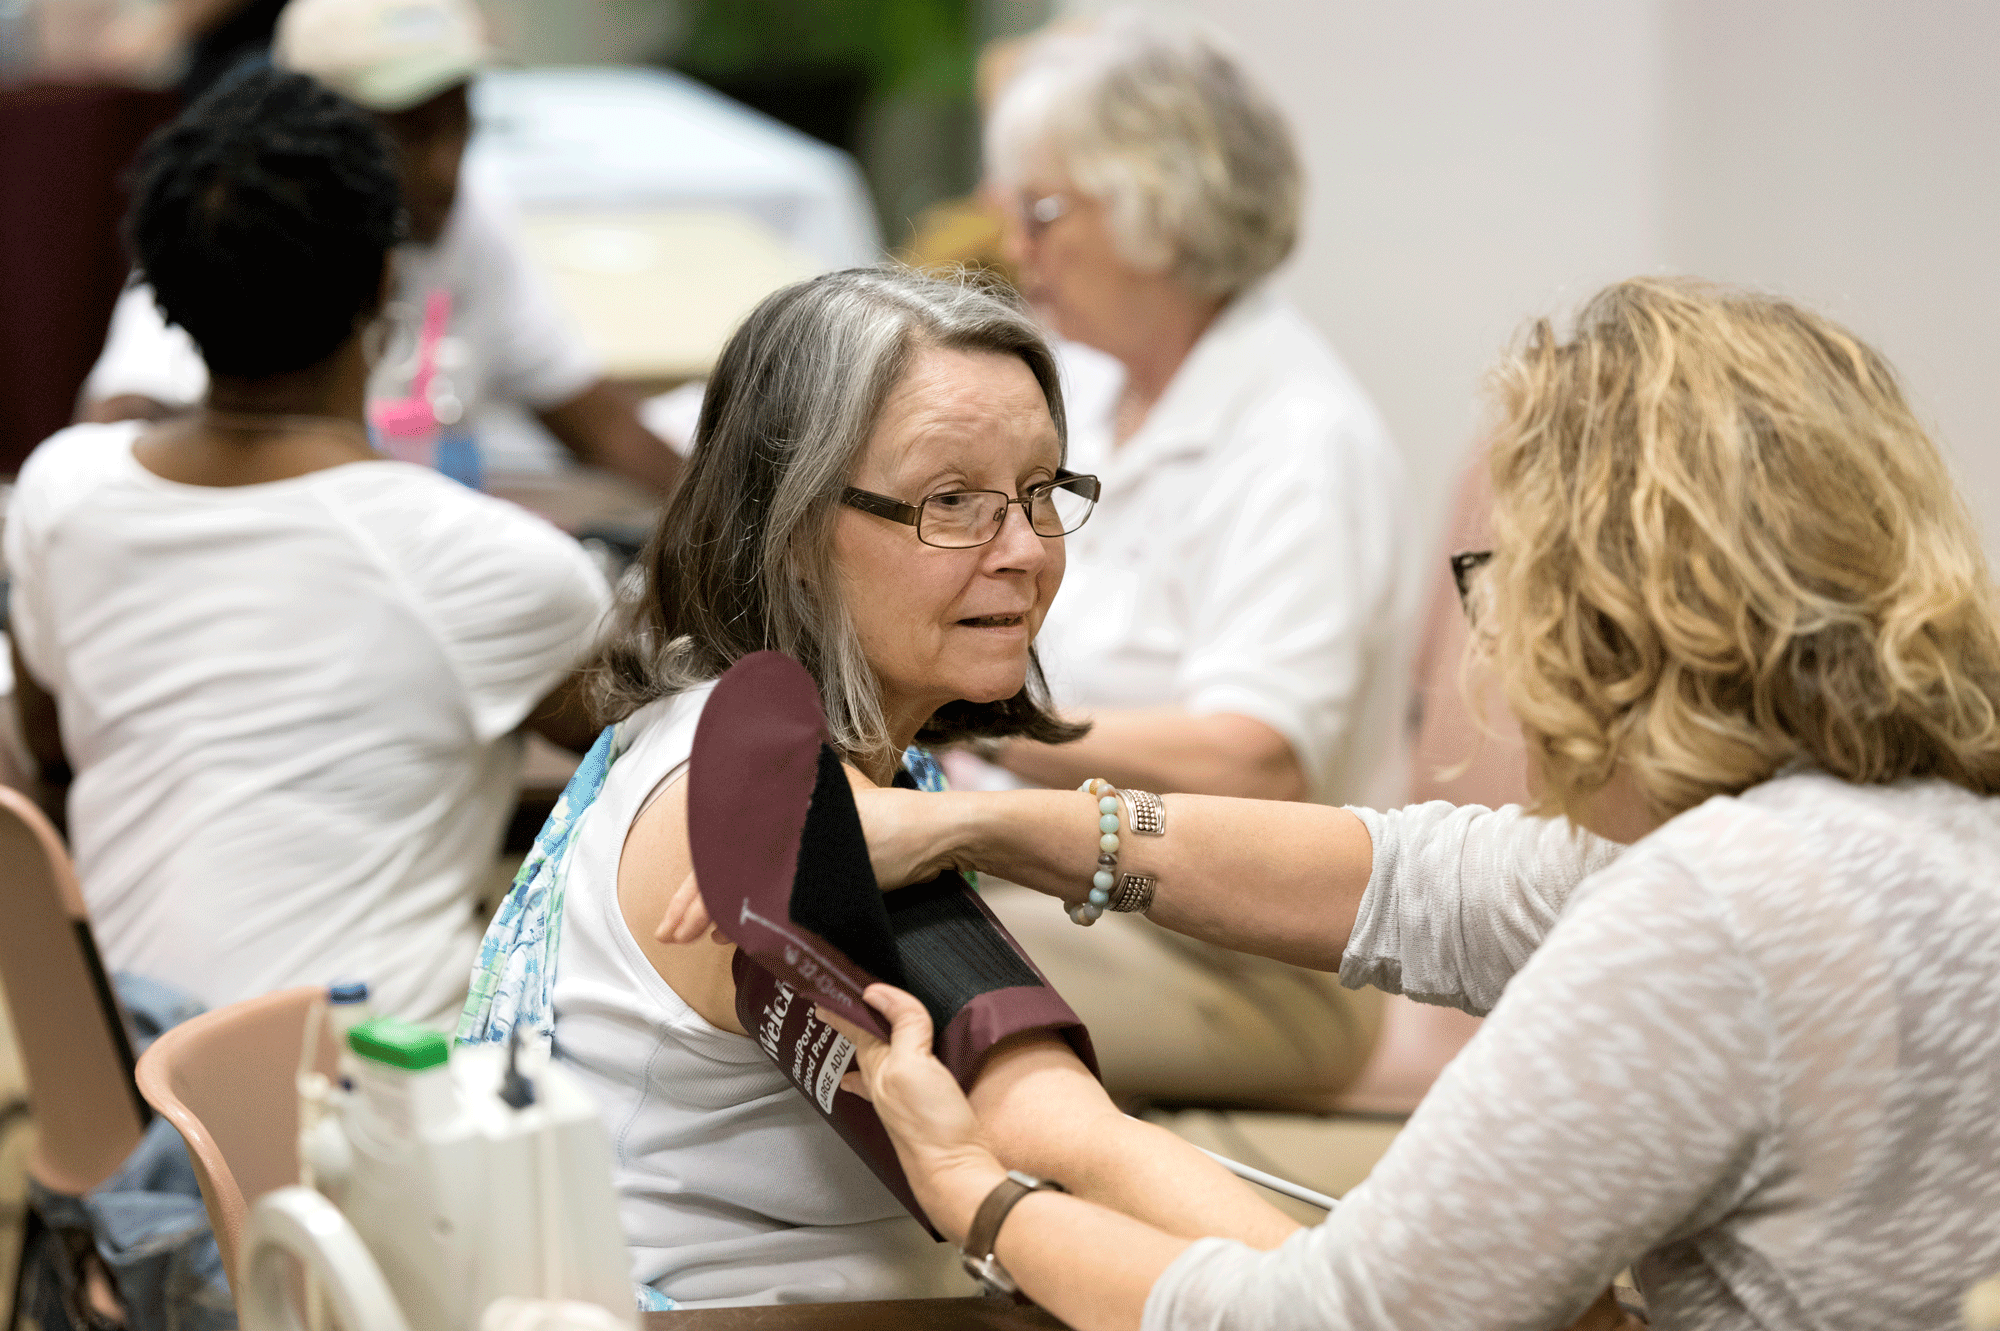 A UALR employee has her blood pressure taken at the Employee Wellness Fair on July 27. Photo by Lonnie Timmons III/UALR Communications.